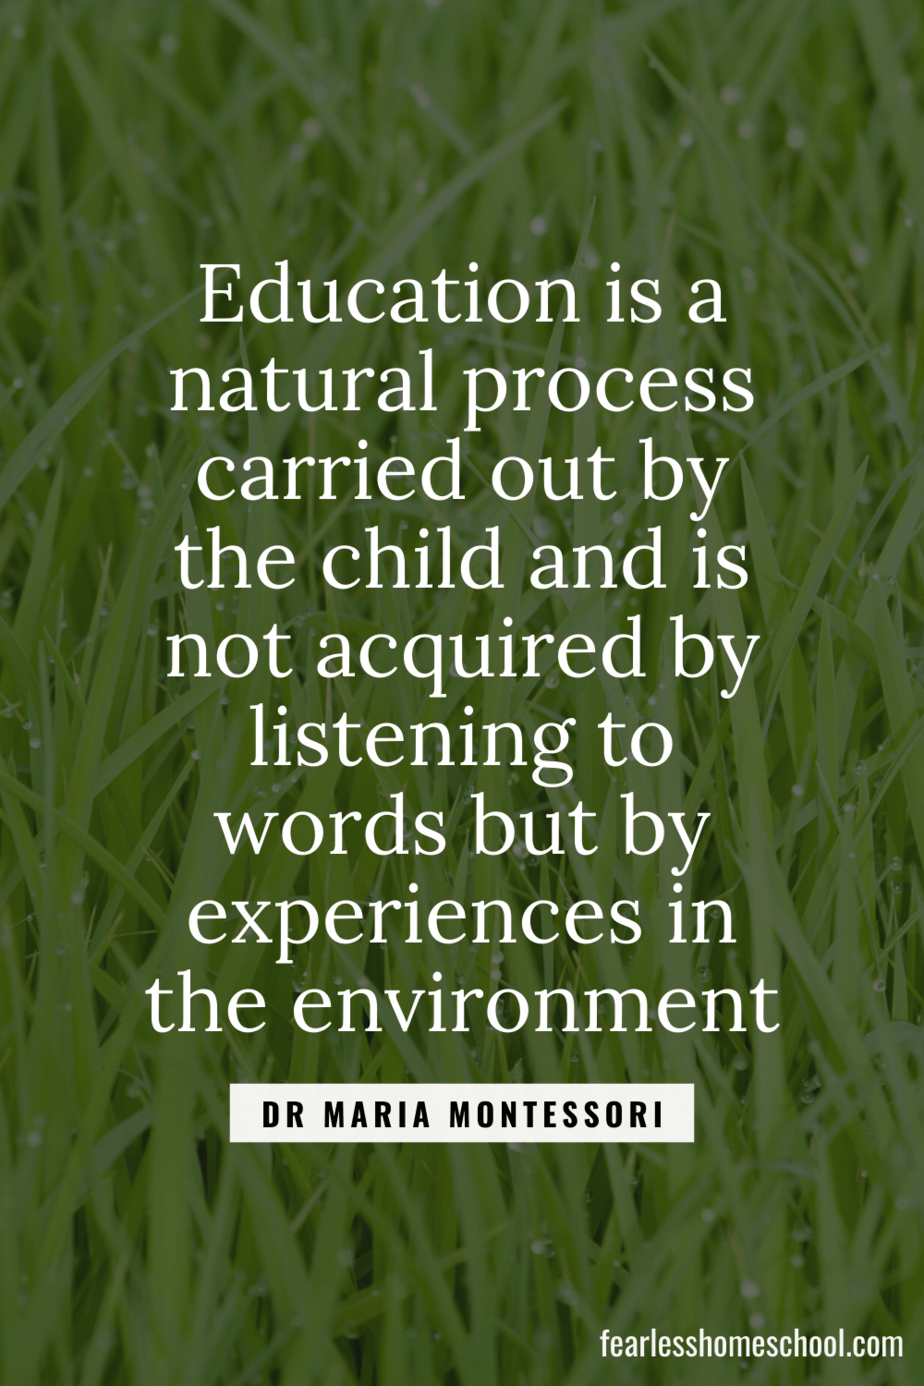 Education is a natural process carried out by the child and is not acquired by listening to words but by experiences in the environment dr maria montessori homeschooling quote